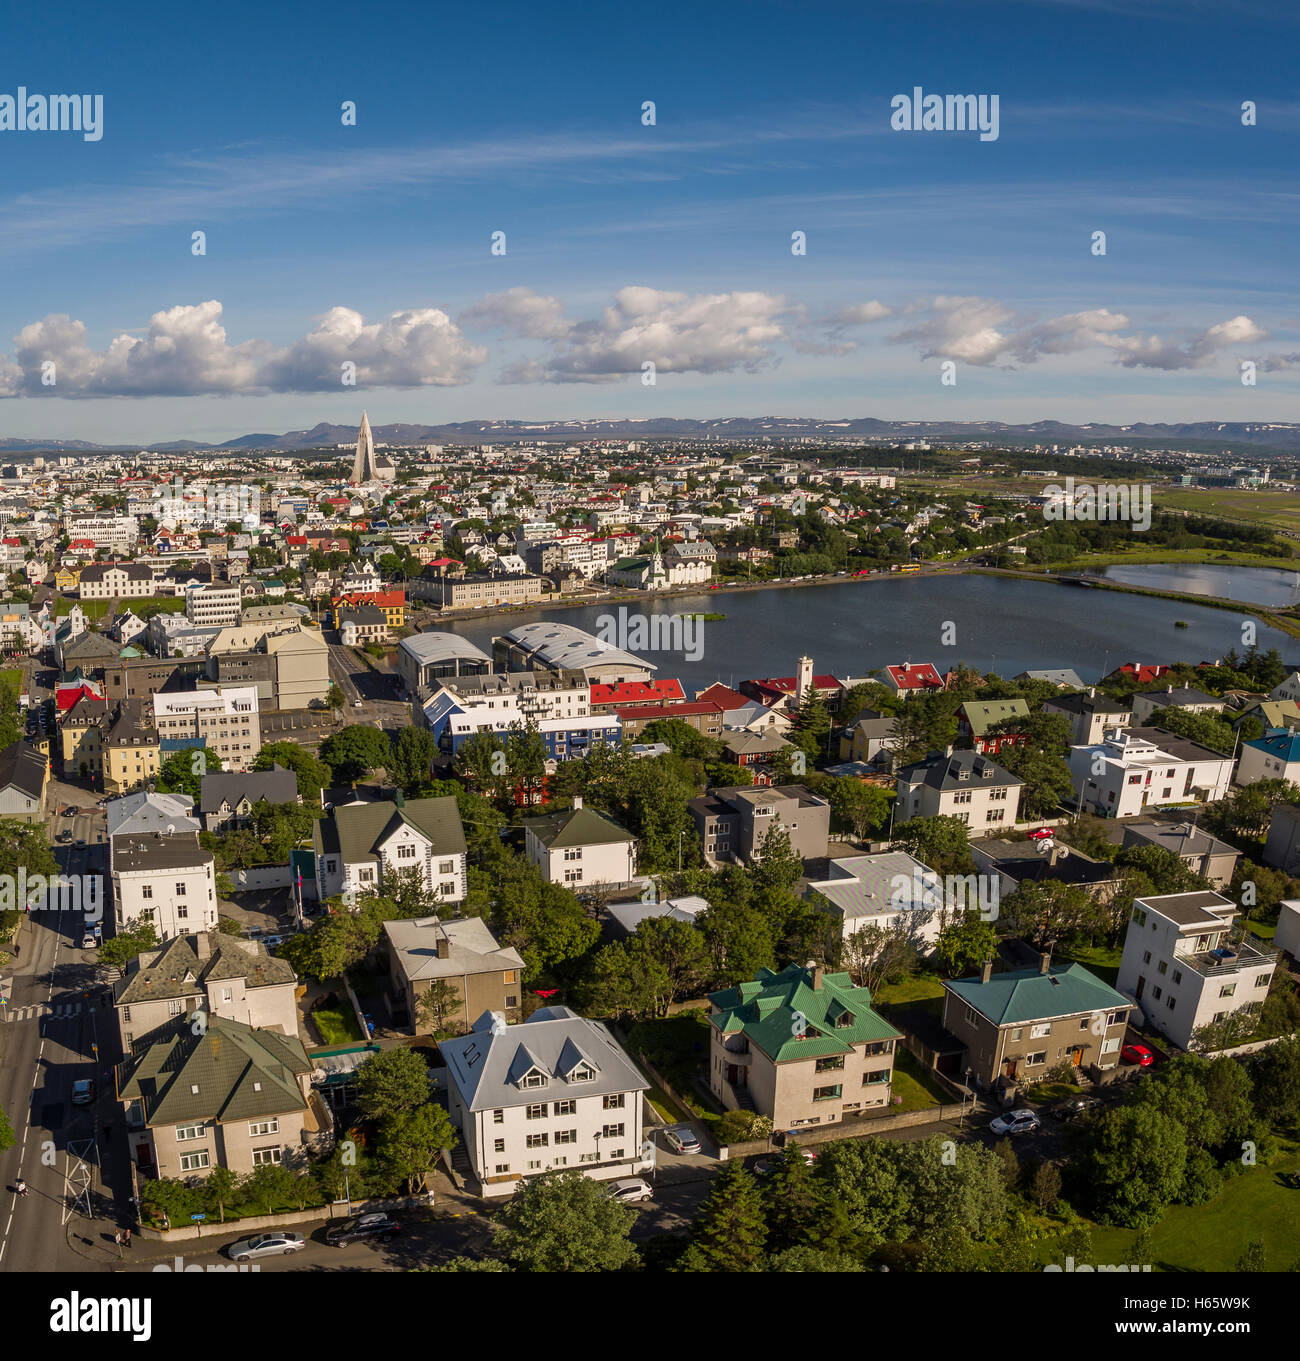 Aerial view of Reykjavik, Iceland. This image is shot using a drone. Stock Photo